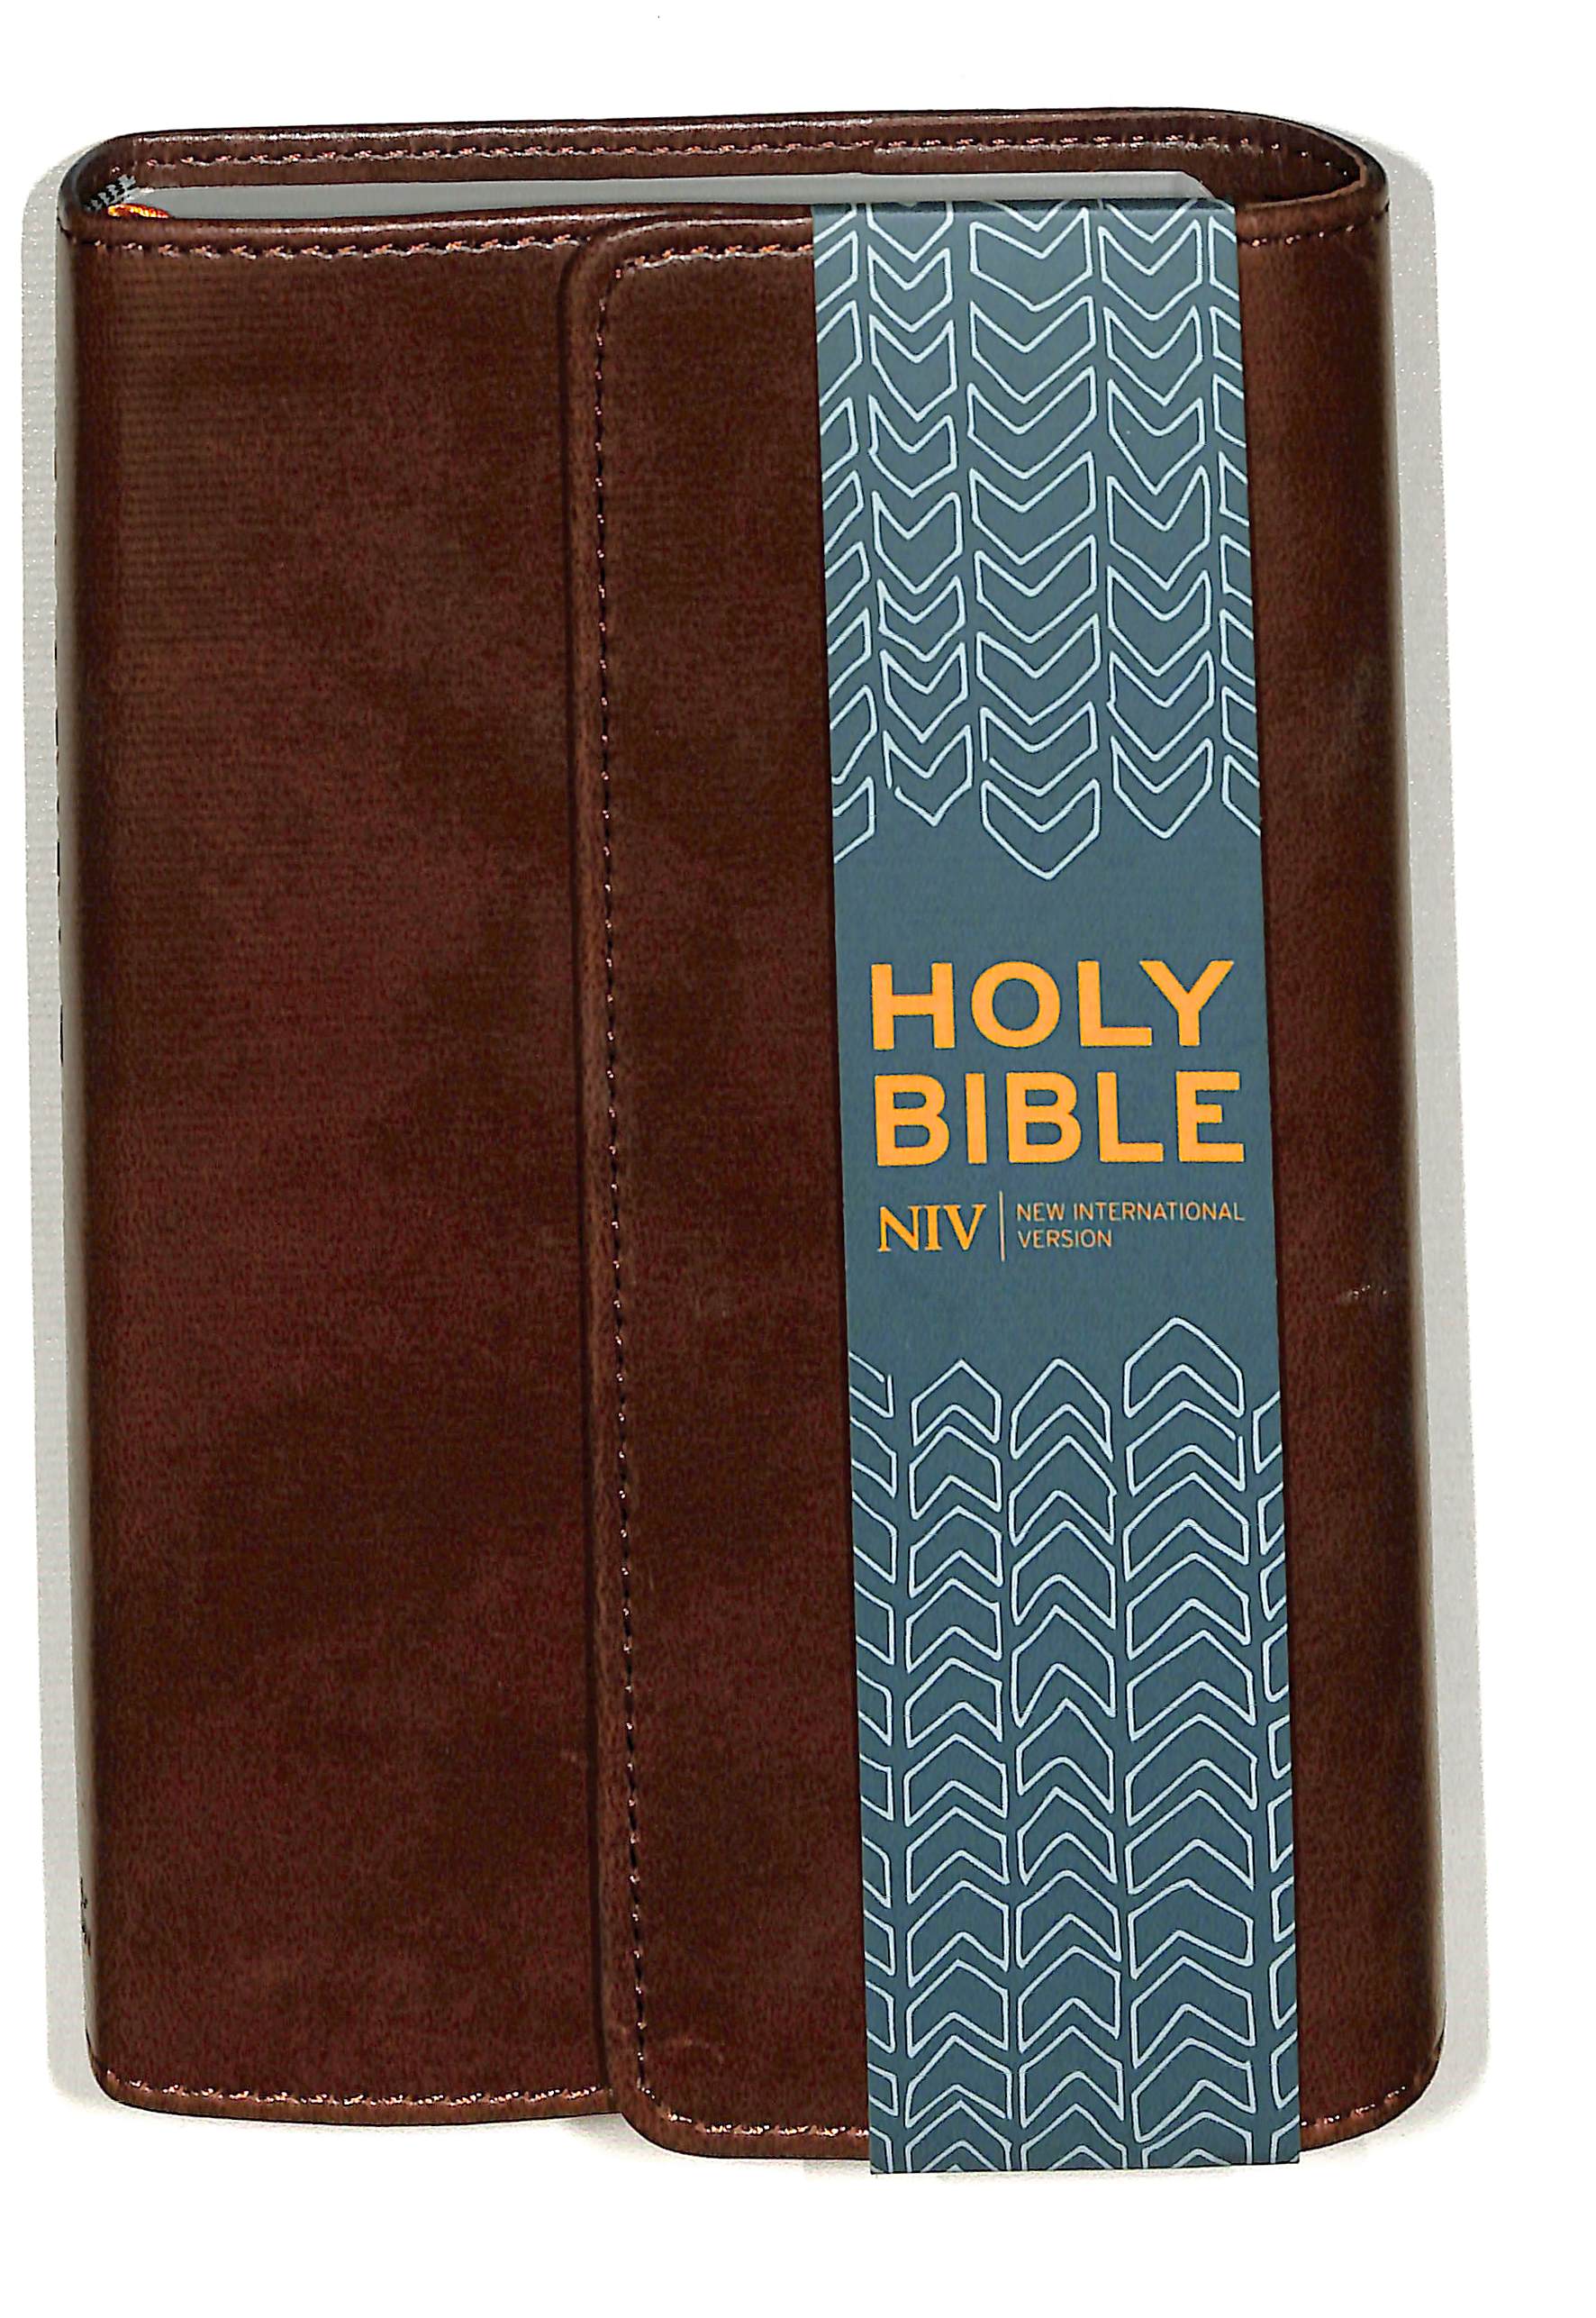 Image of NIV Pocket Bible, Brown, Imitation Leather, Anglicised, Magnetic Clasp, Reading Plan, Bible Shortcuts, Timeline, Book by Book Overview, Helpful Bible Passages other